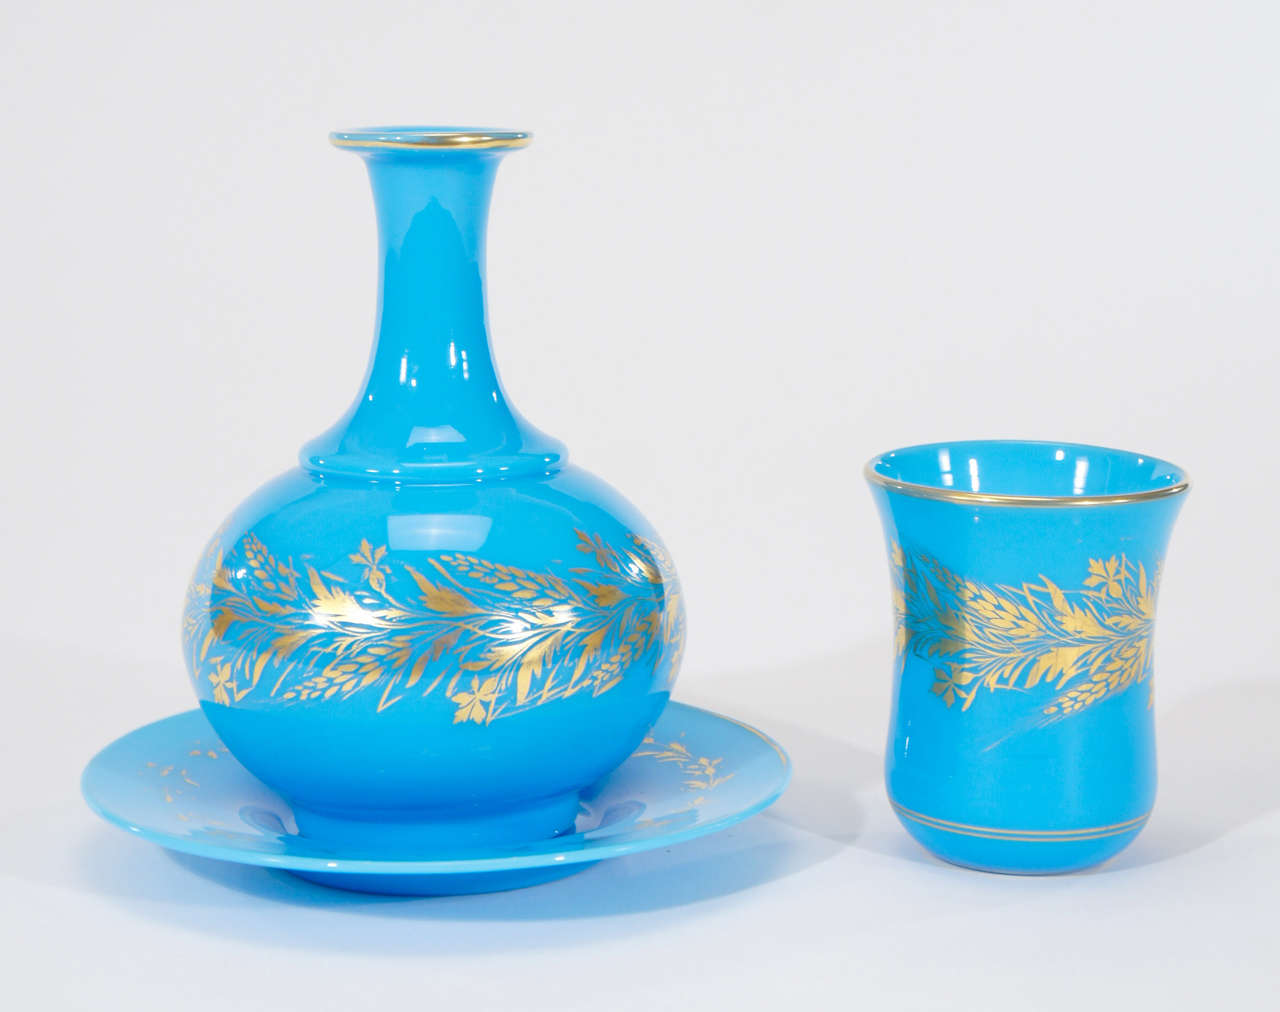 Rococo Revival 19th Century Baccarat Opaline Turquoise 3 Piece 